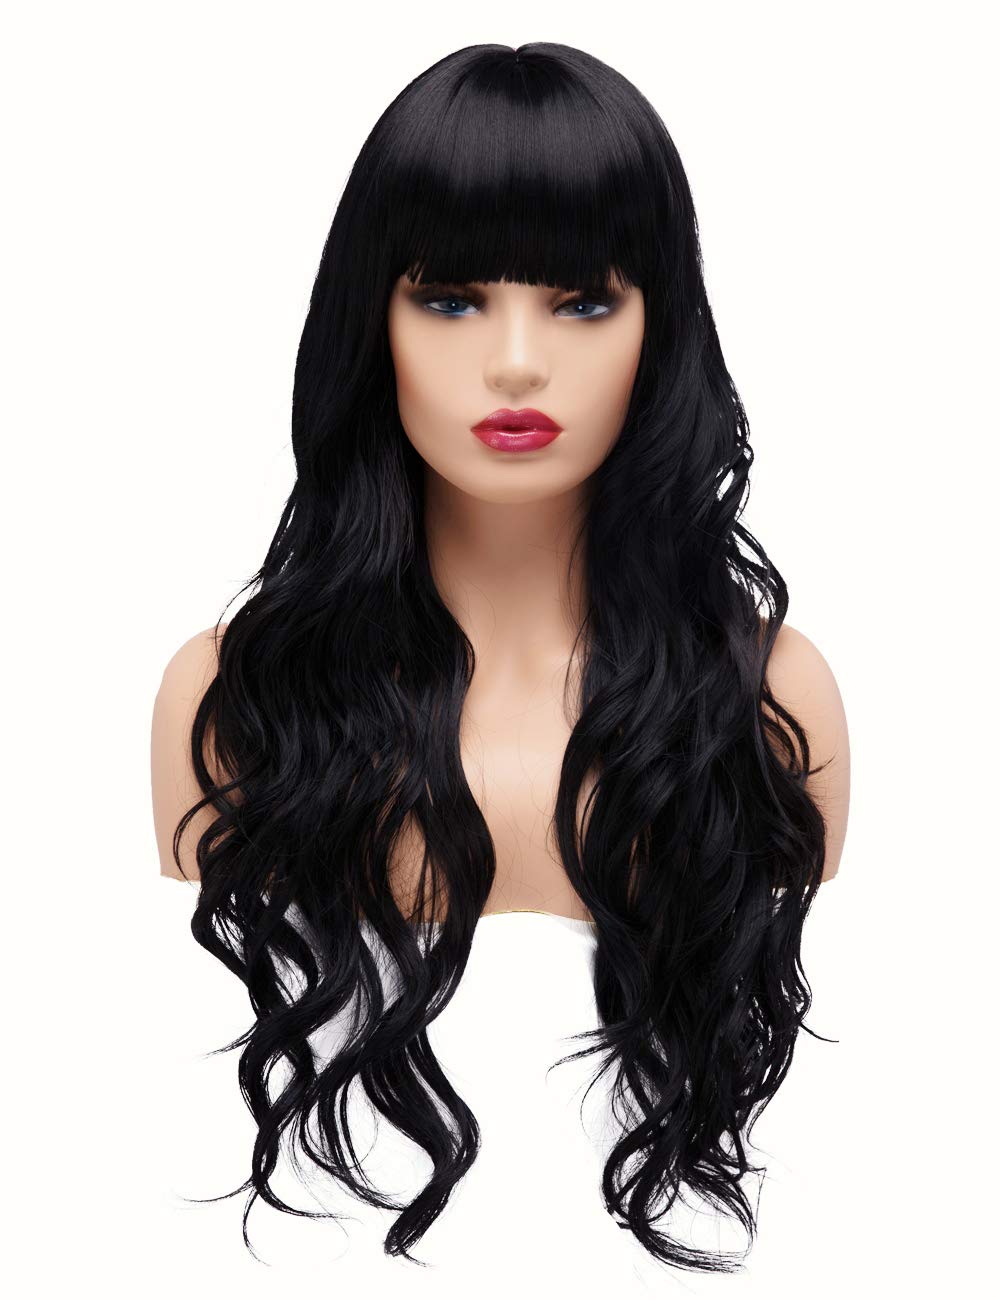 Lush Locks 24 inches Curly Wavy Wig for Women (Natural Black Color)